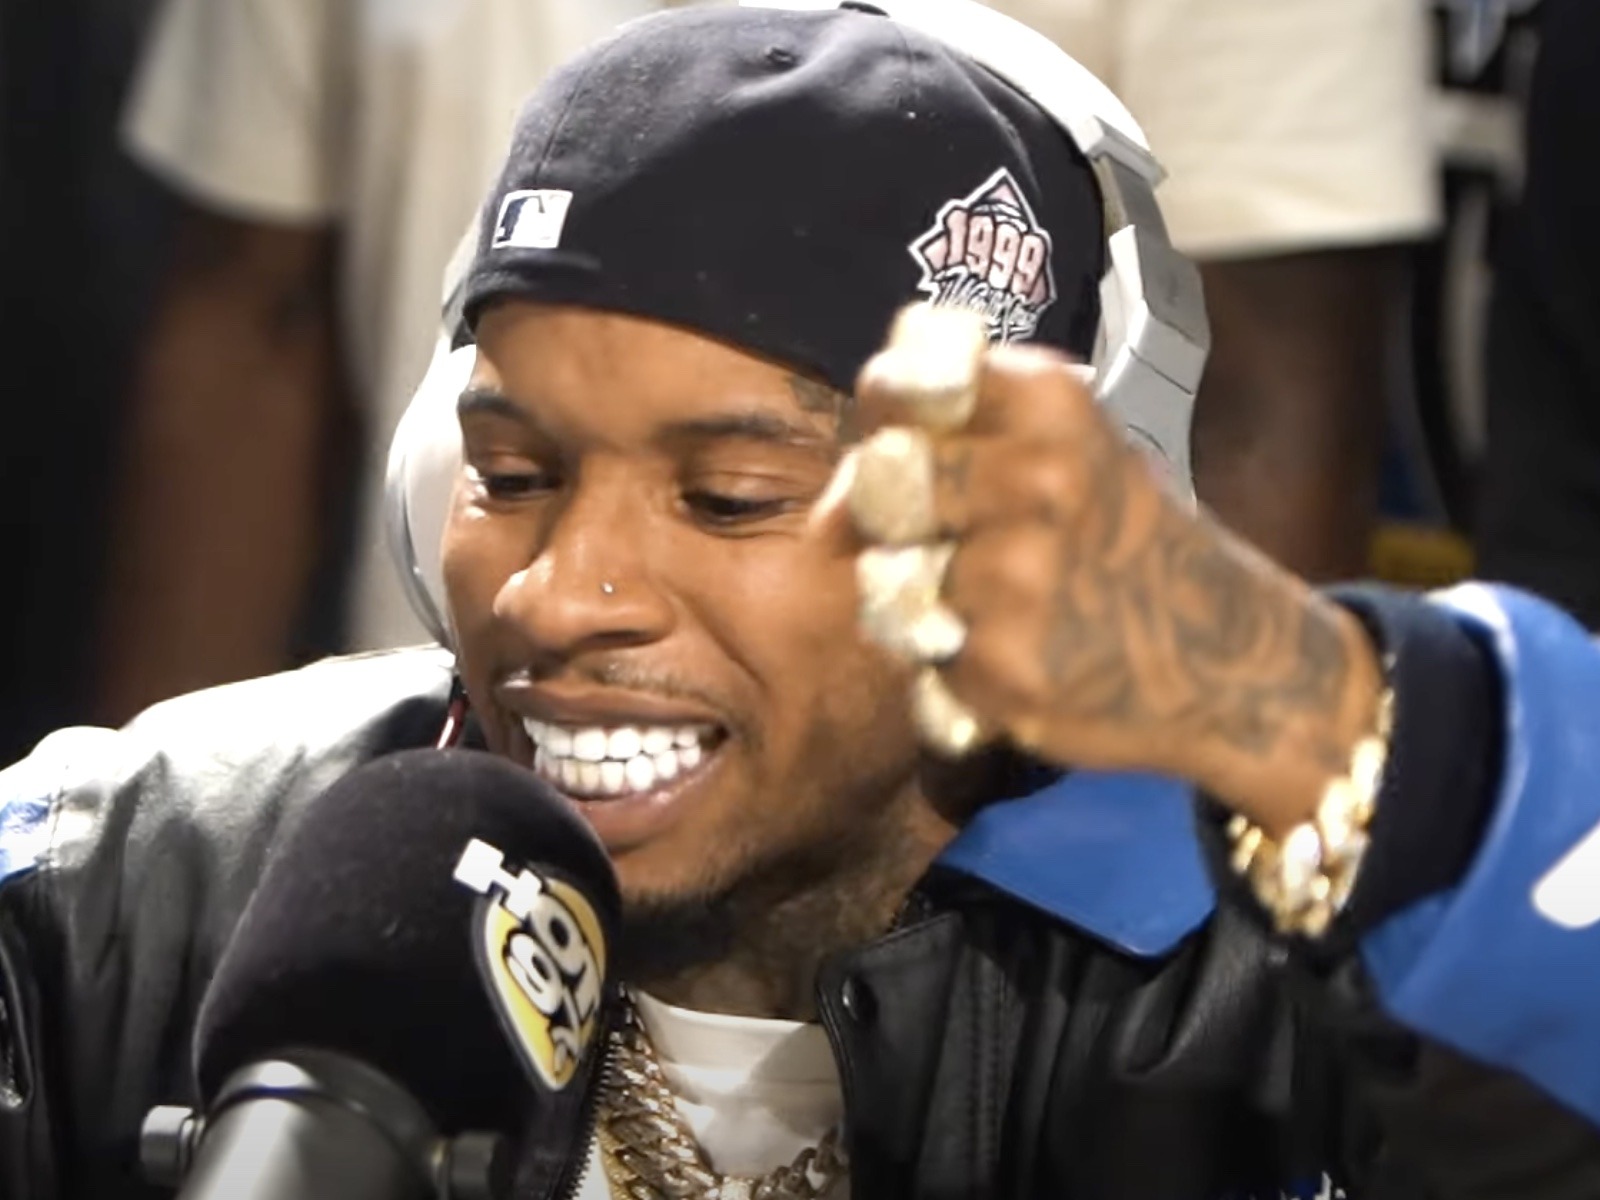 Tory Lanez Discredits Meg Thee Stallion's Awards In Hot 97 Freestyle  SOHH.com